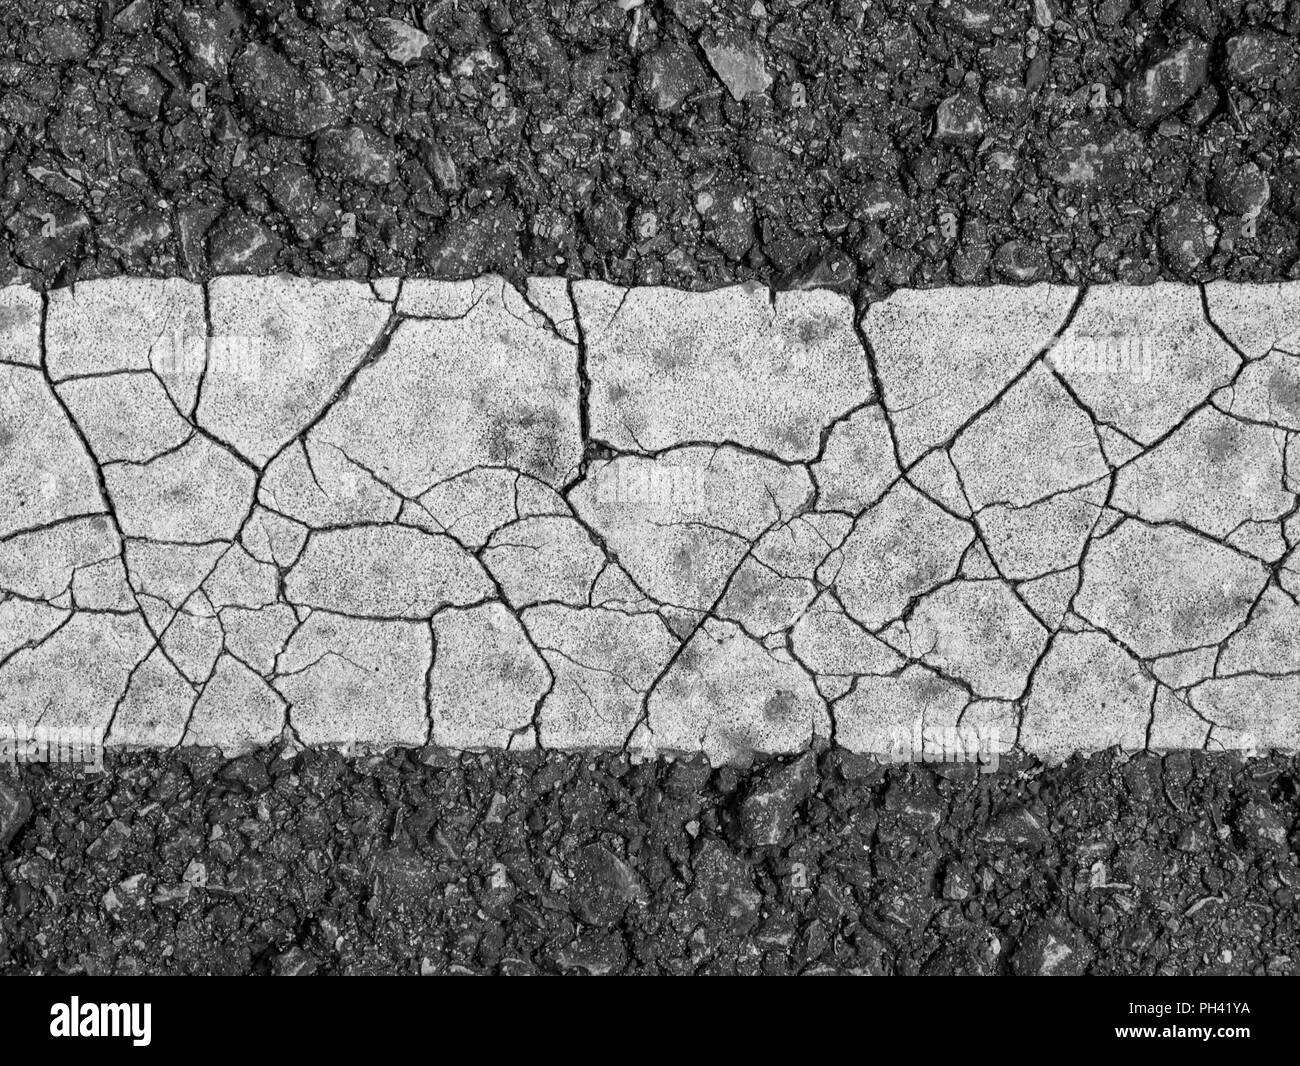 Asphalt surface of road with lines abstract background Stock Photo